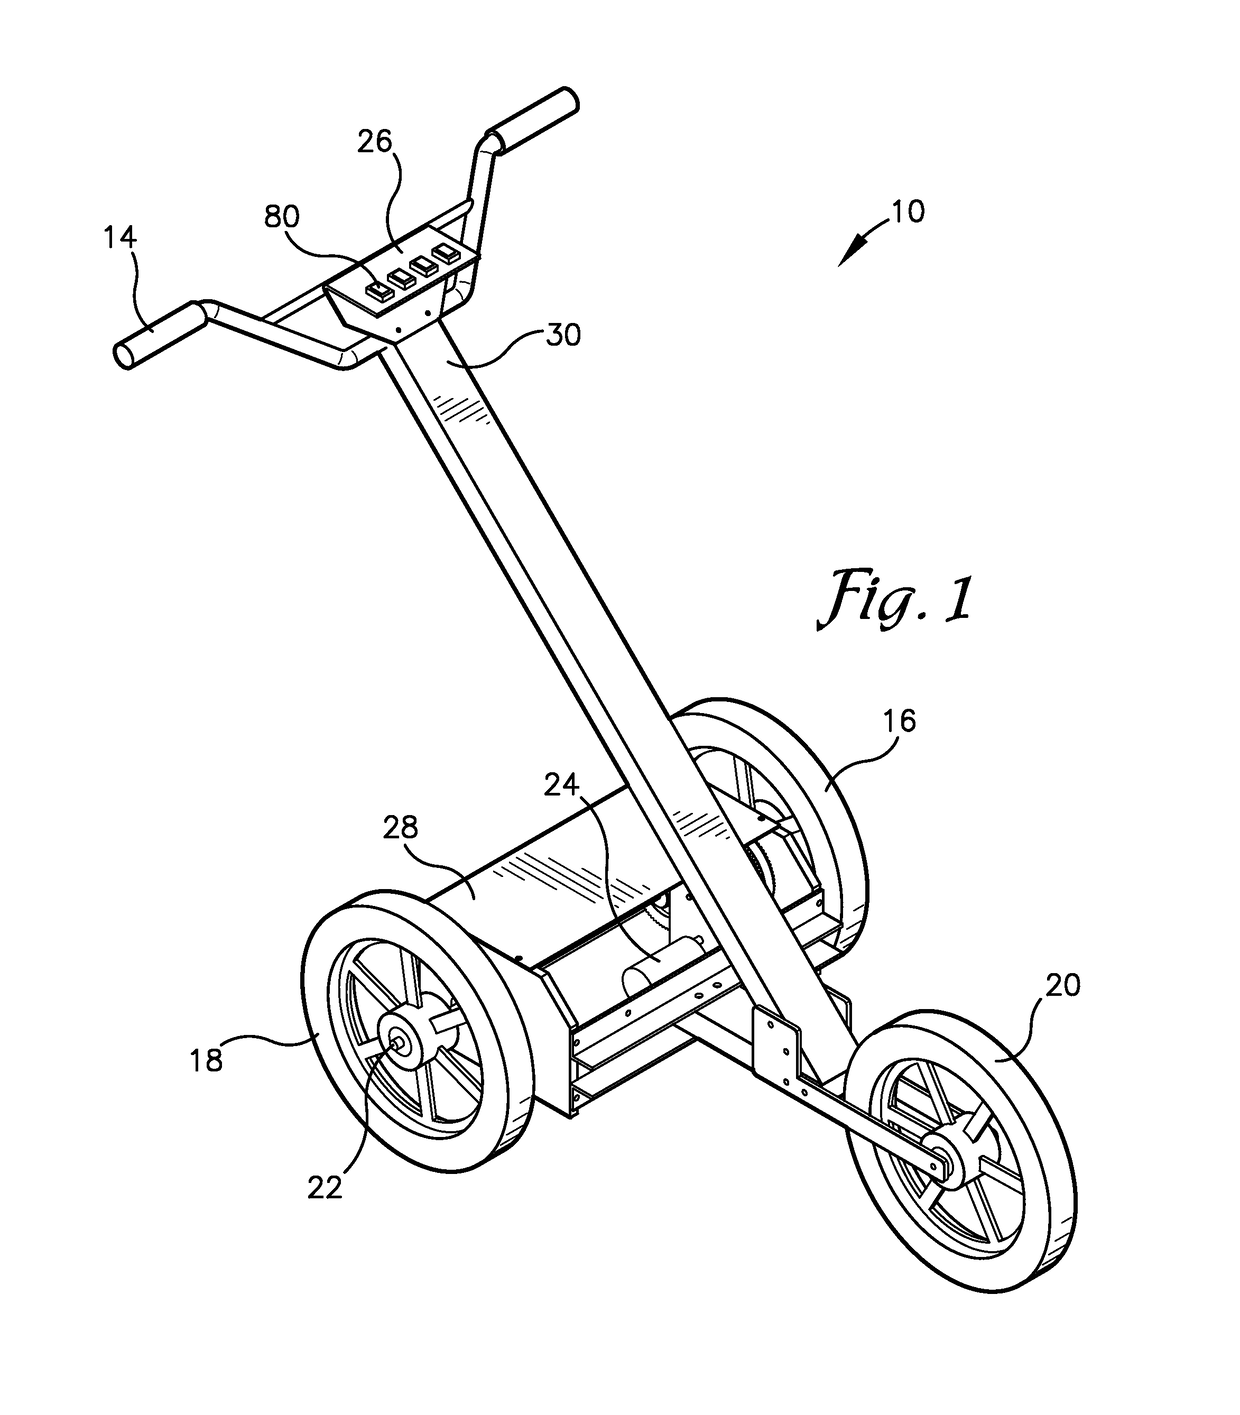 Pushable exercise apparatus for resistance training